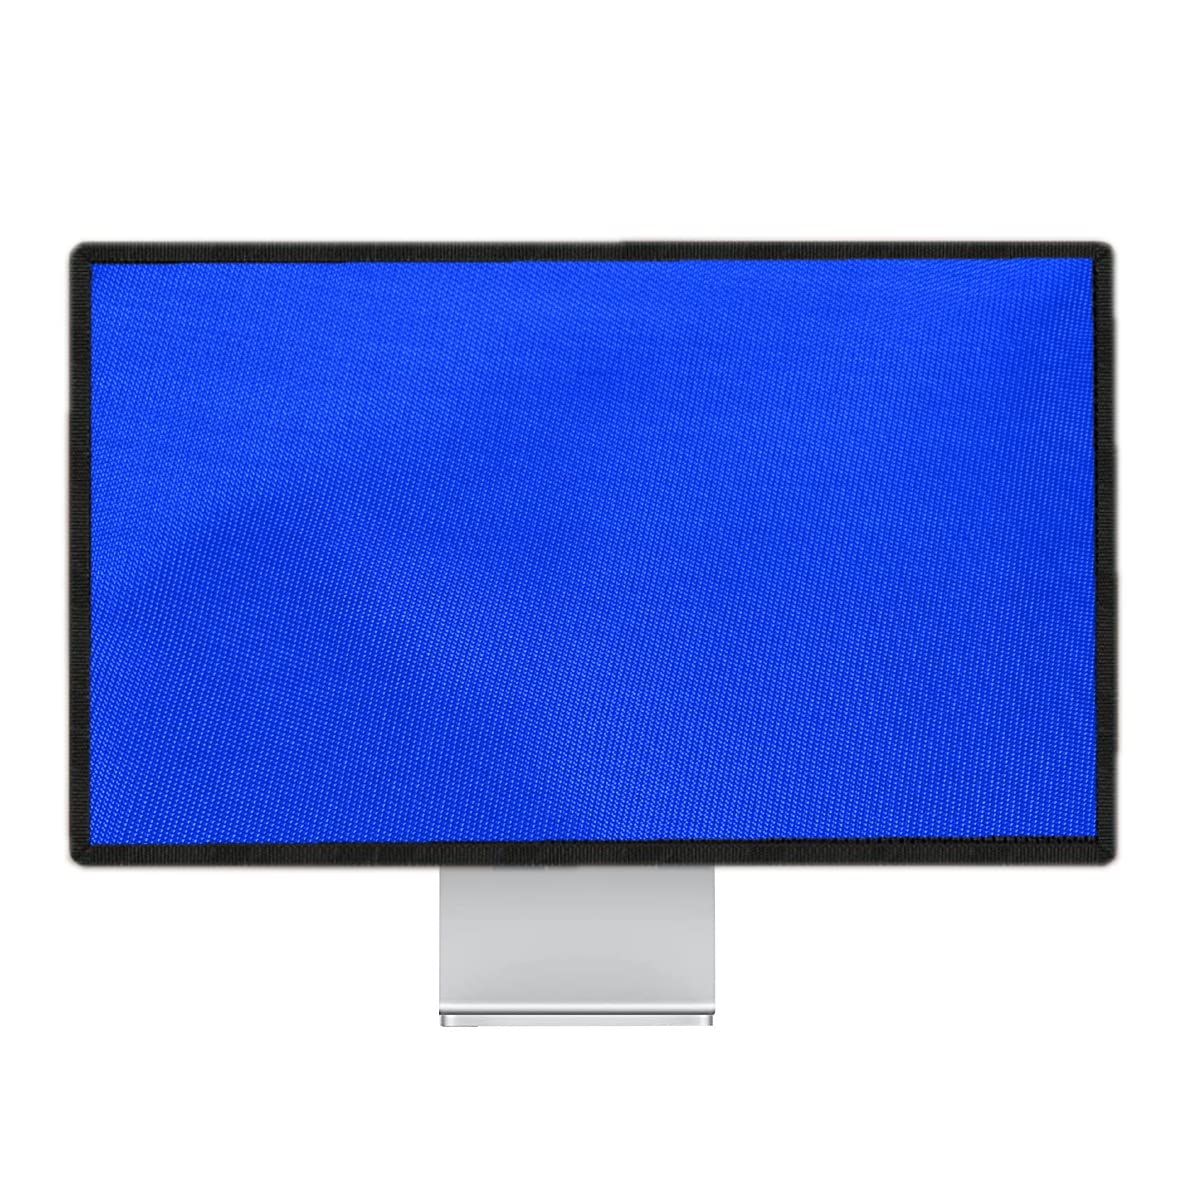 PalaP Super Premium Dust Proof Monitor Cover for Apple iMac 24 inches Monitor (Bright Blue)